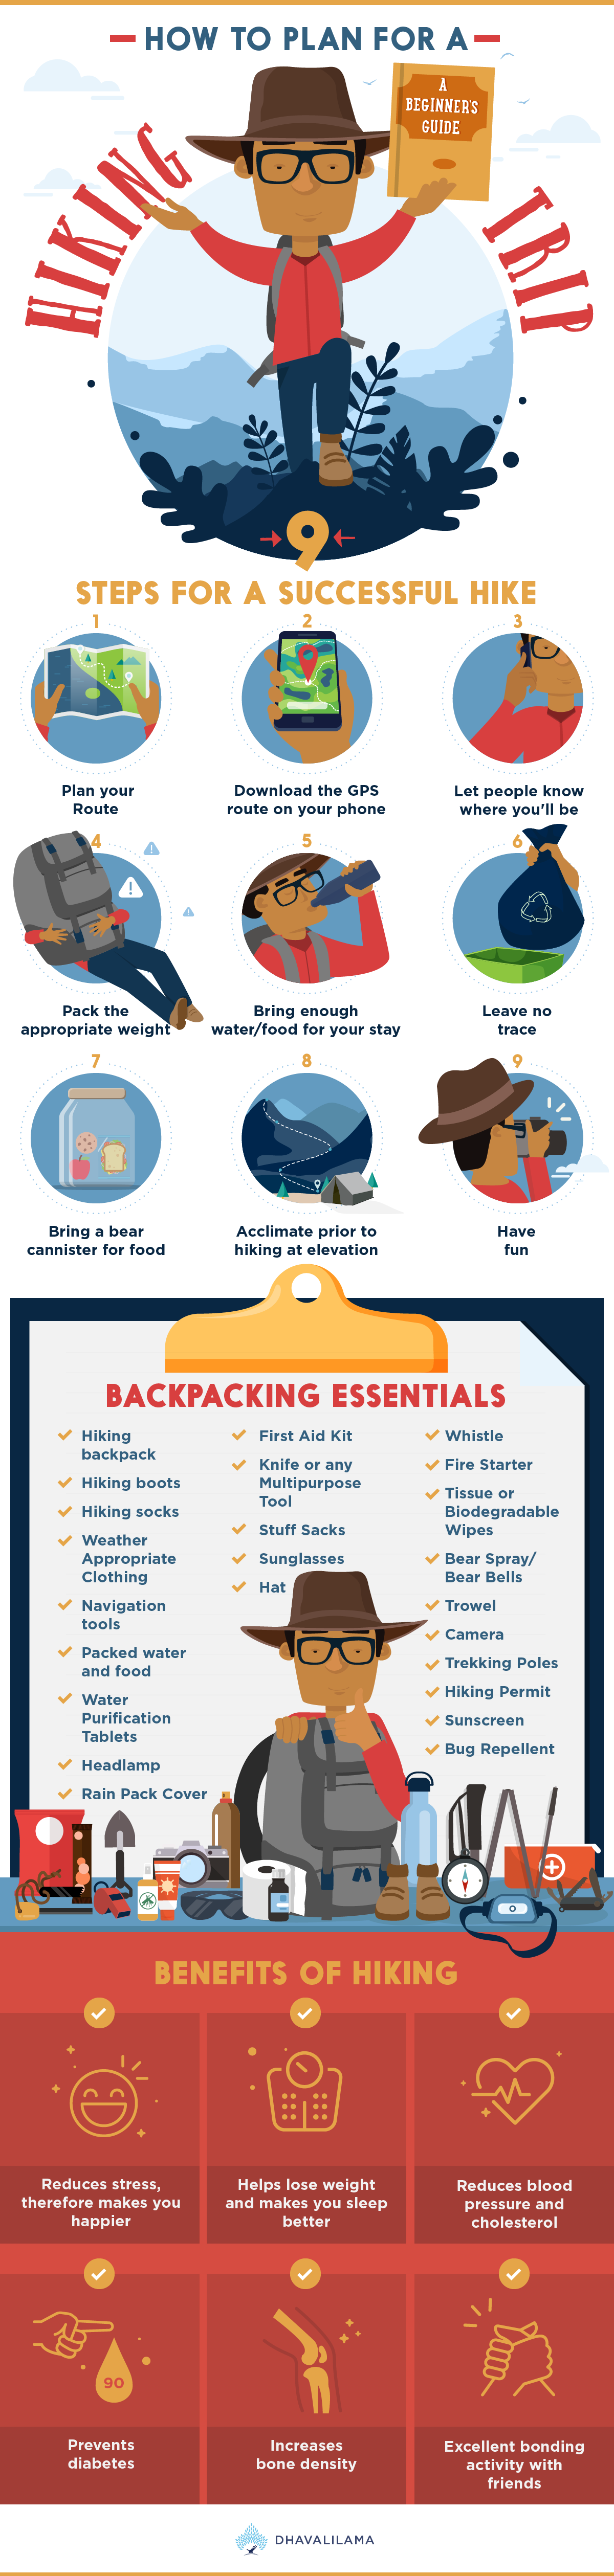 planning a backpacking trip